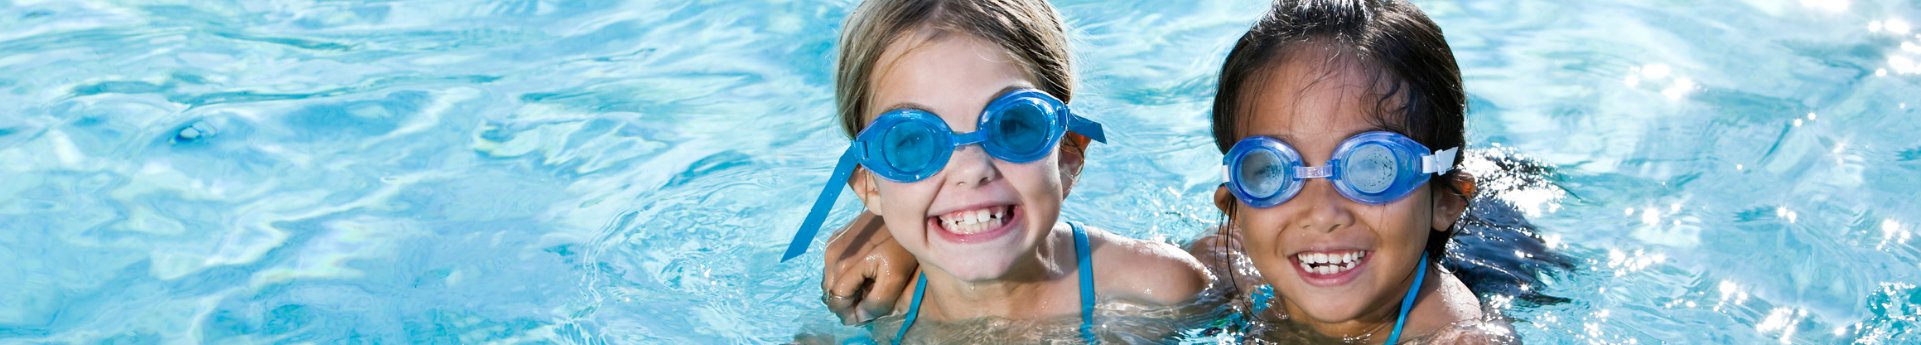 Two girls swimming together wearing goggles